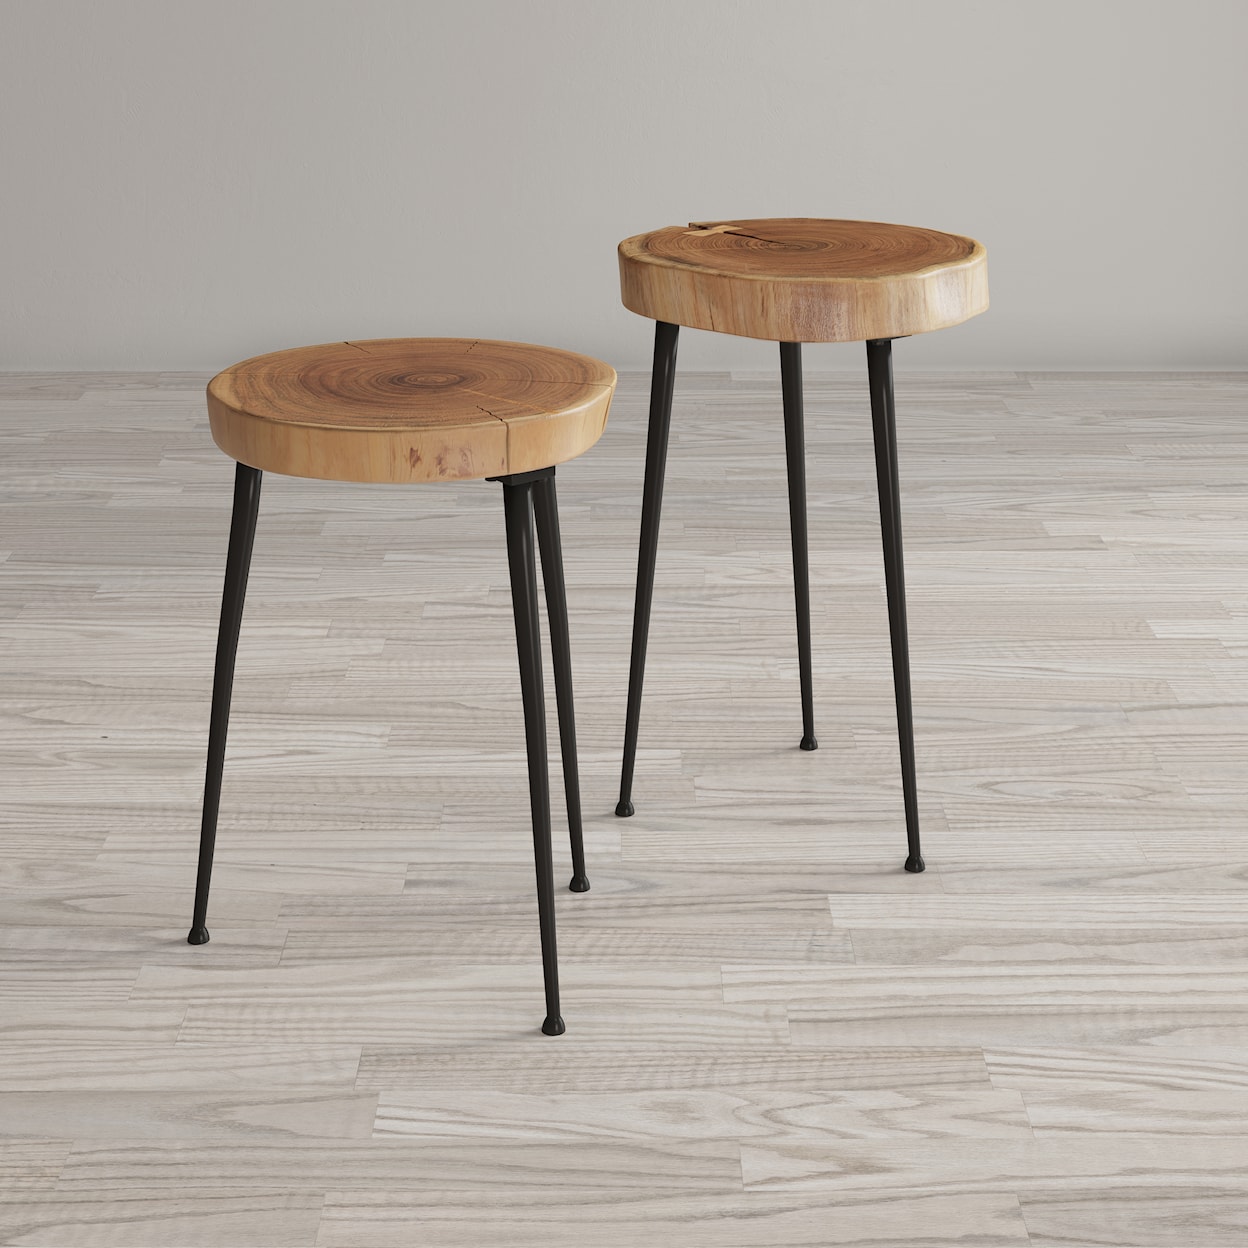 Belfort Essentials Global Archive Wood and Iron Accent Tables (Set of 2)